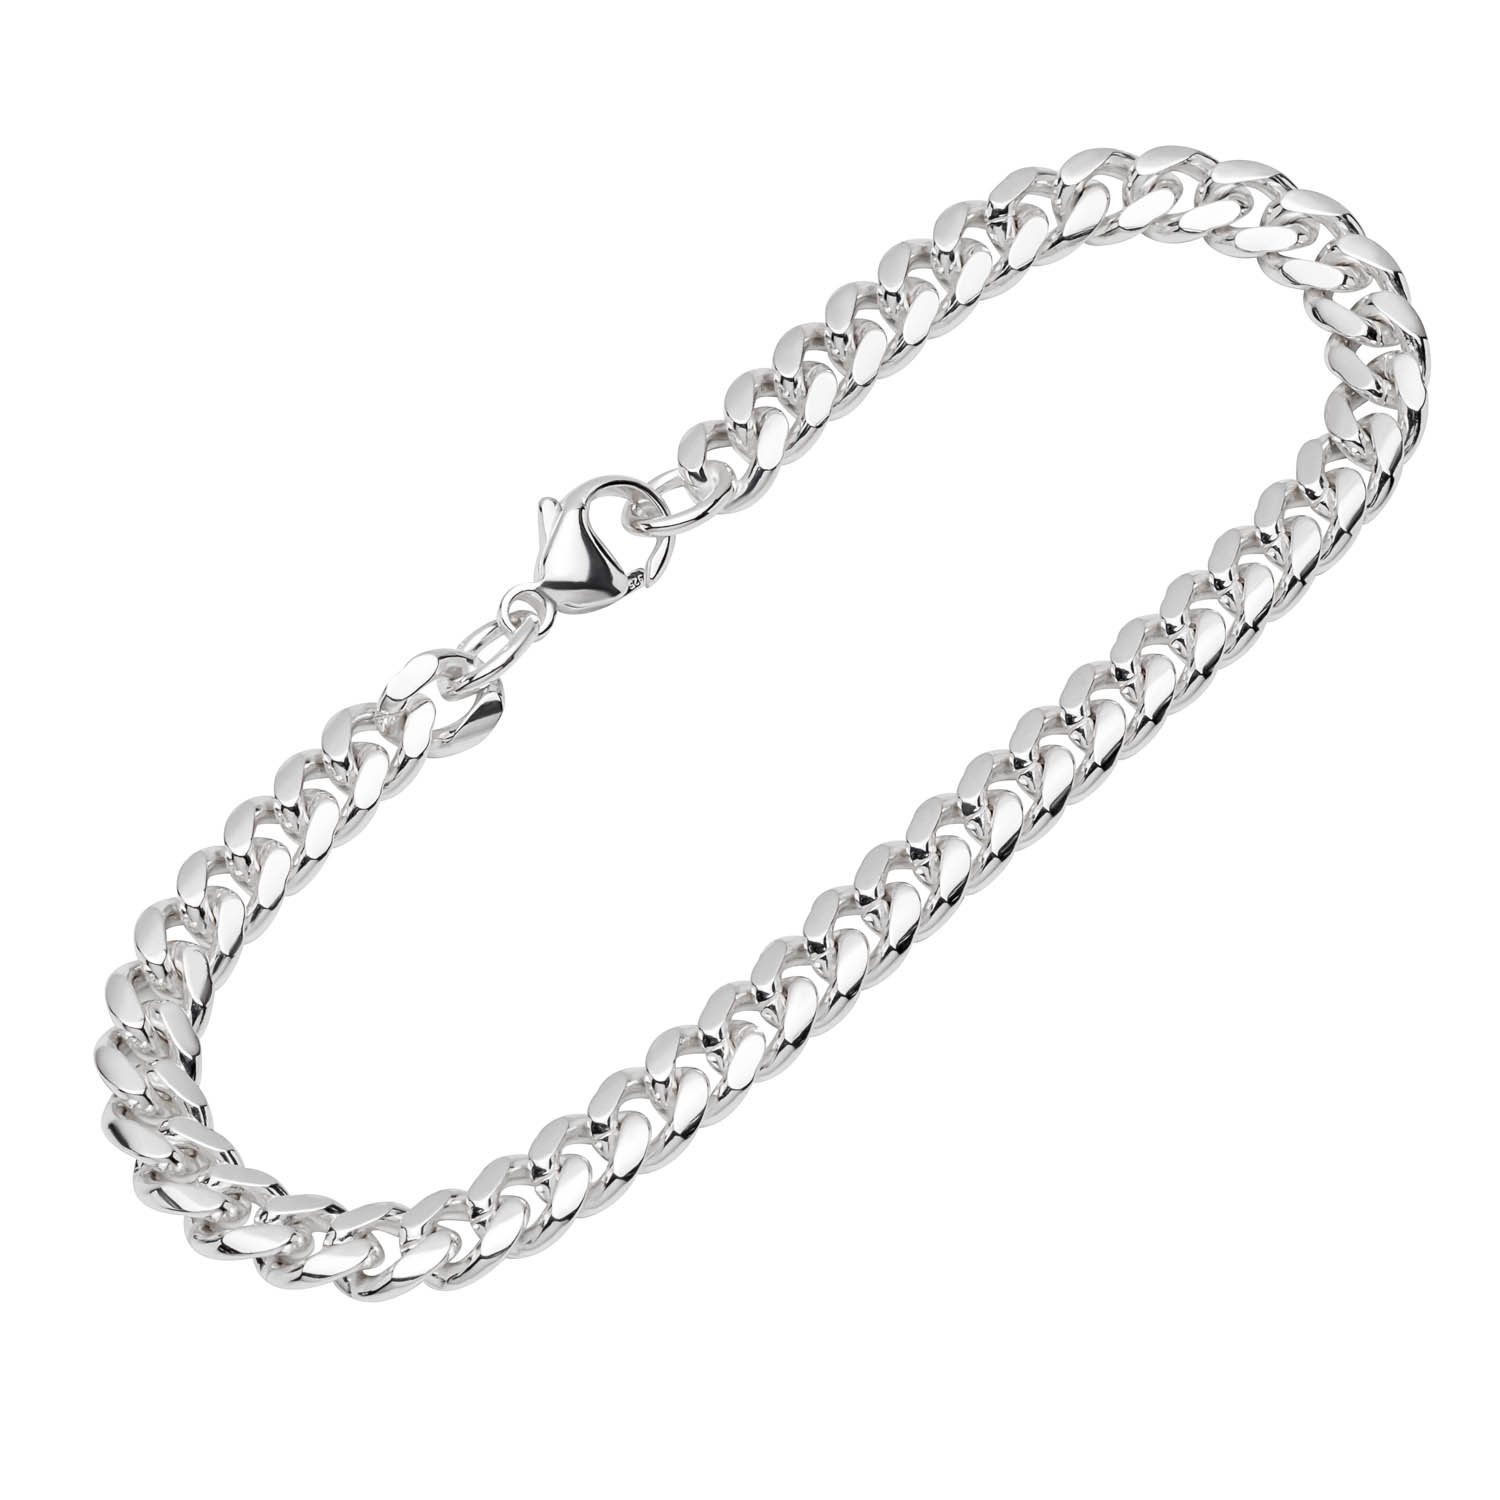 NKlaus Silberarmband Armband 925 Sterling Silber 21cm Panzerkette oval (1 Stück), Made in Germany